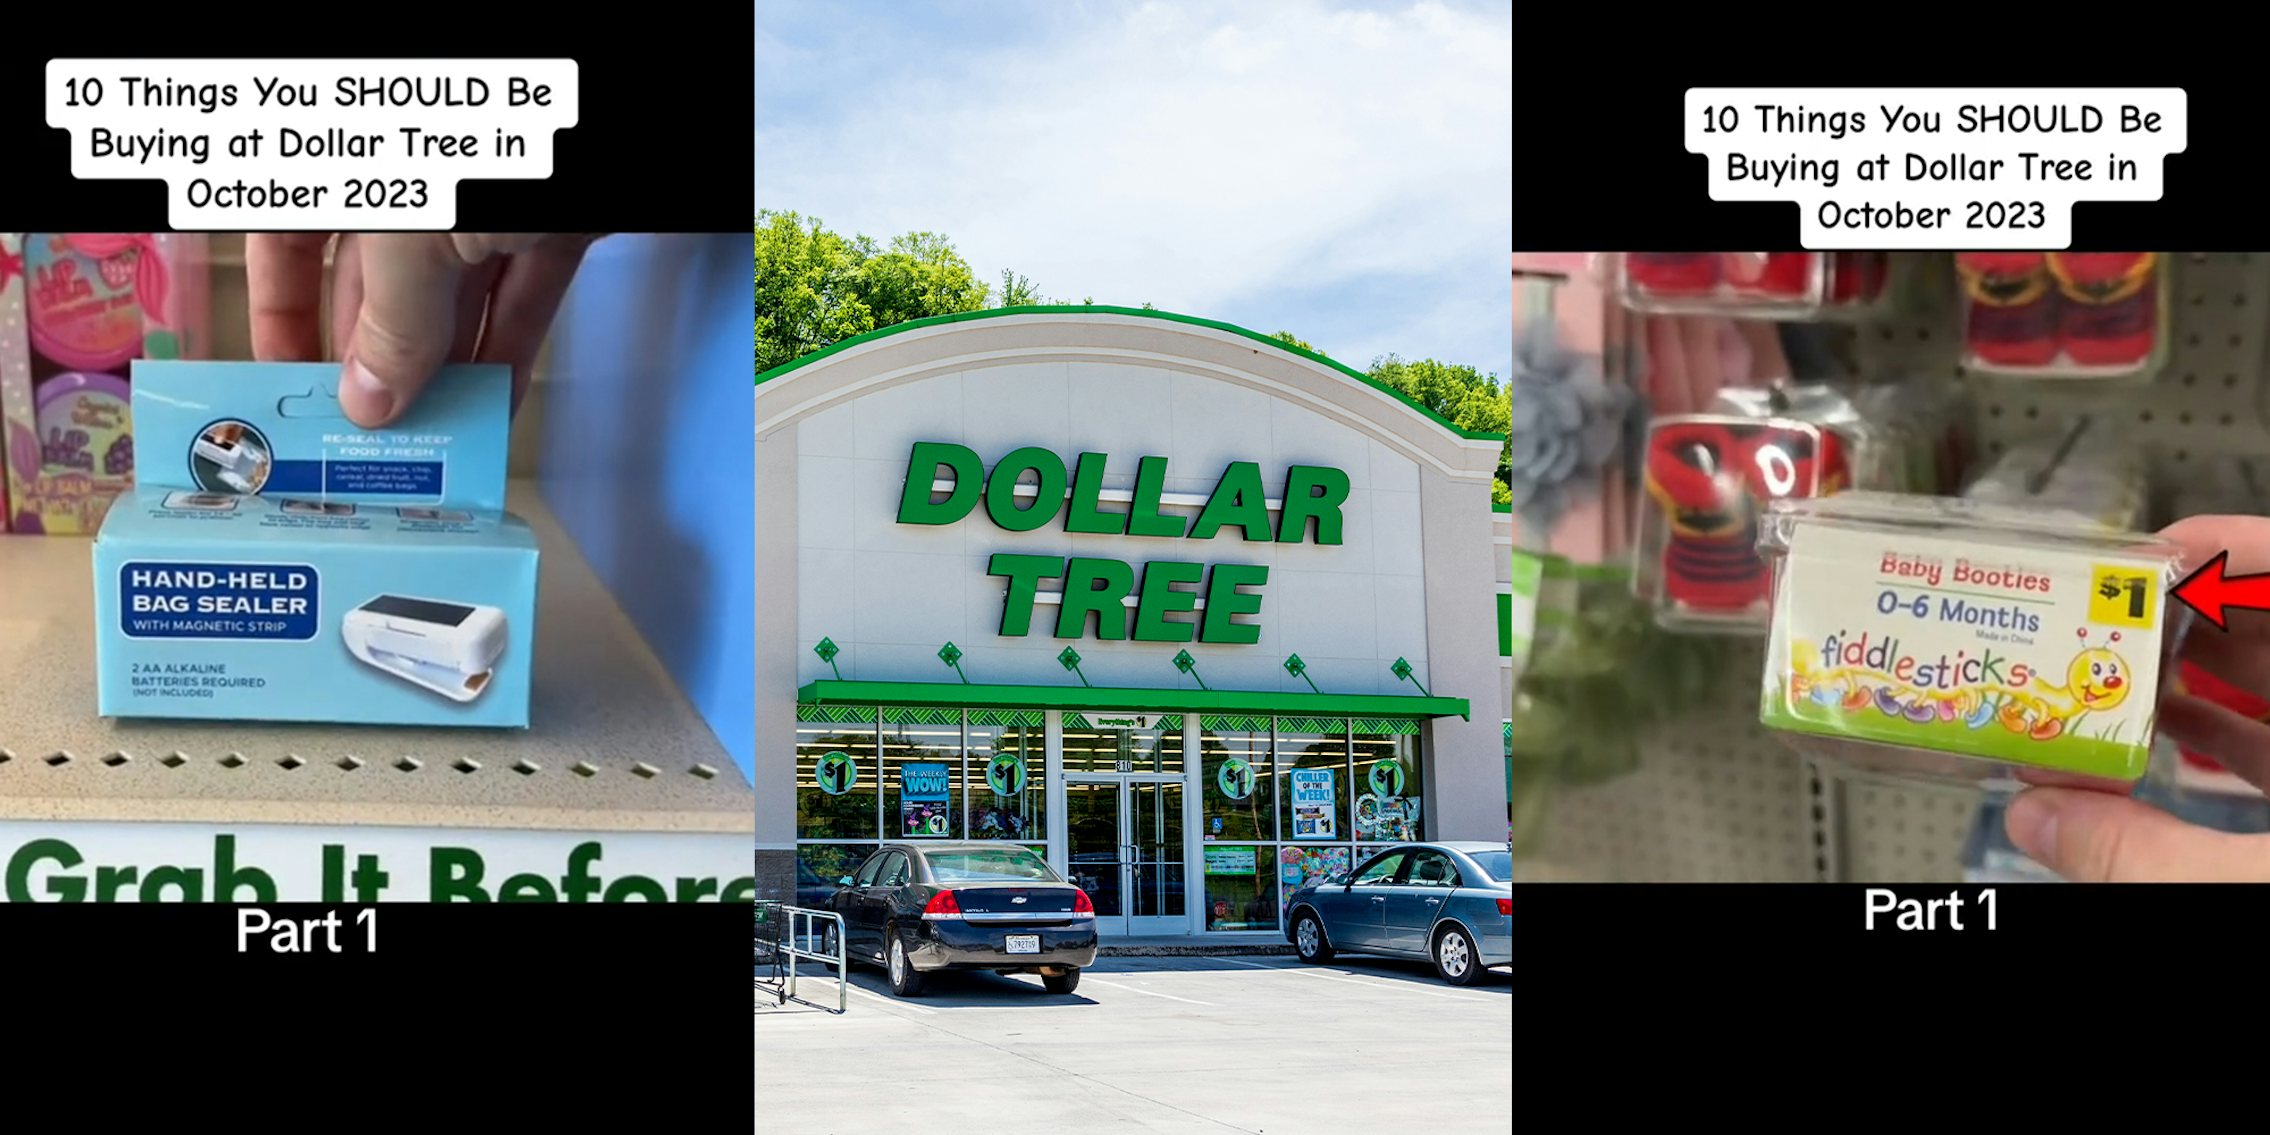 The Deal Guy' Says These Are Top Dollar Tree Items to Buy